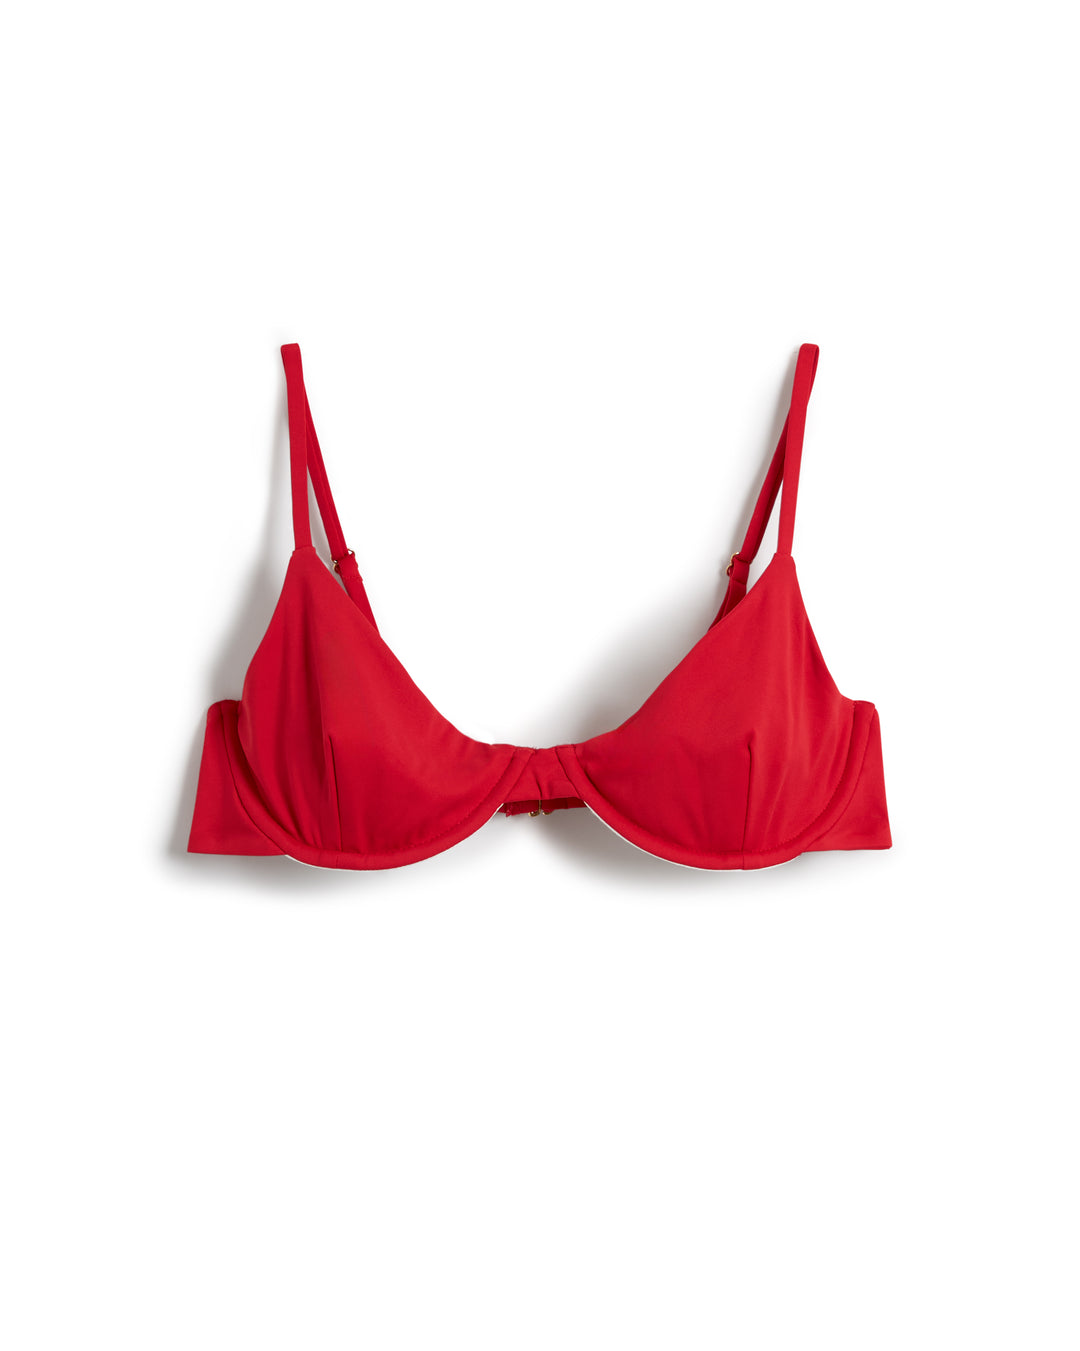 A red underwire bralette with adjustable straps on a white background is The Avila Top - Pico by Dandy Del Mar.